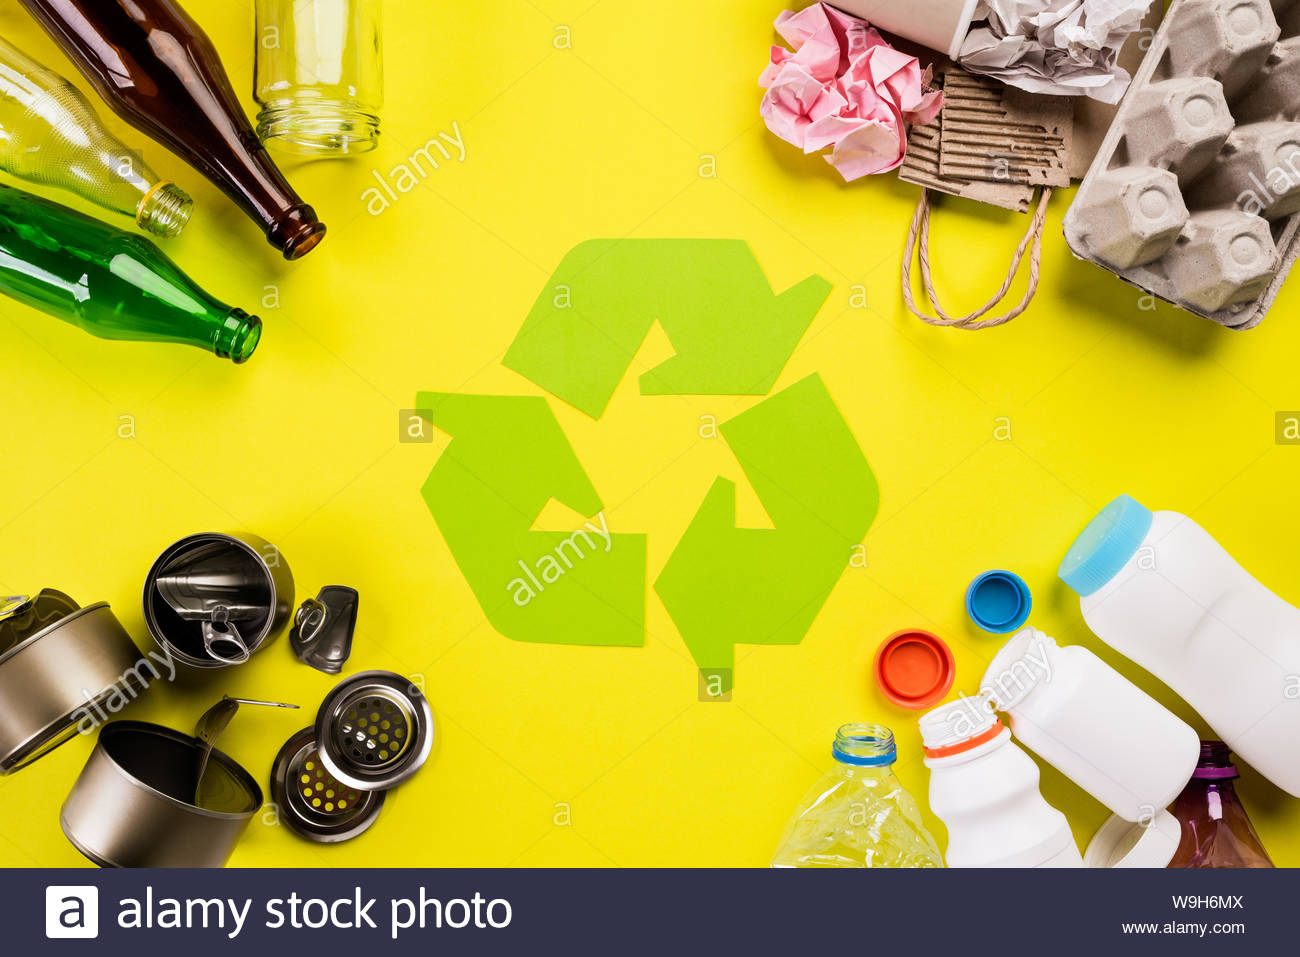 Top Of Different Garbage Materials With Recycling Symbol On